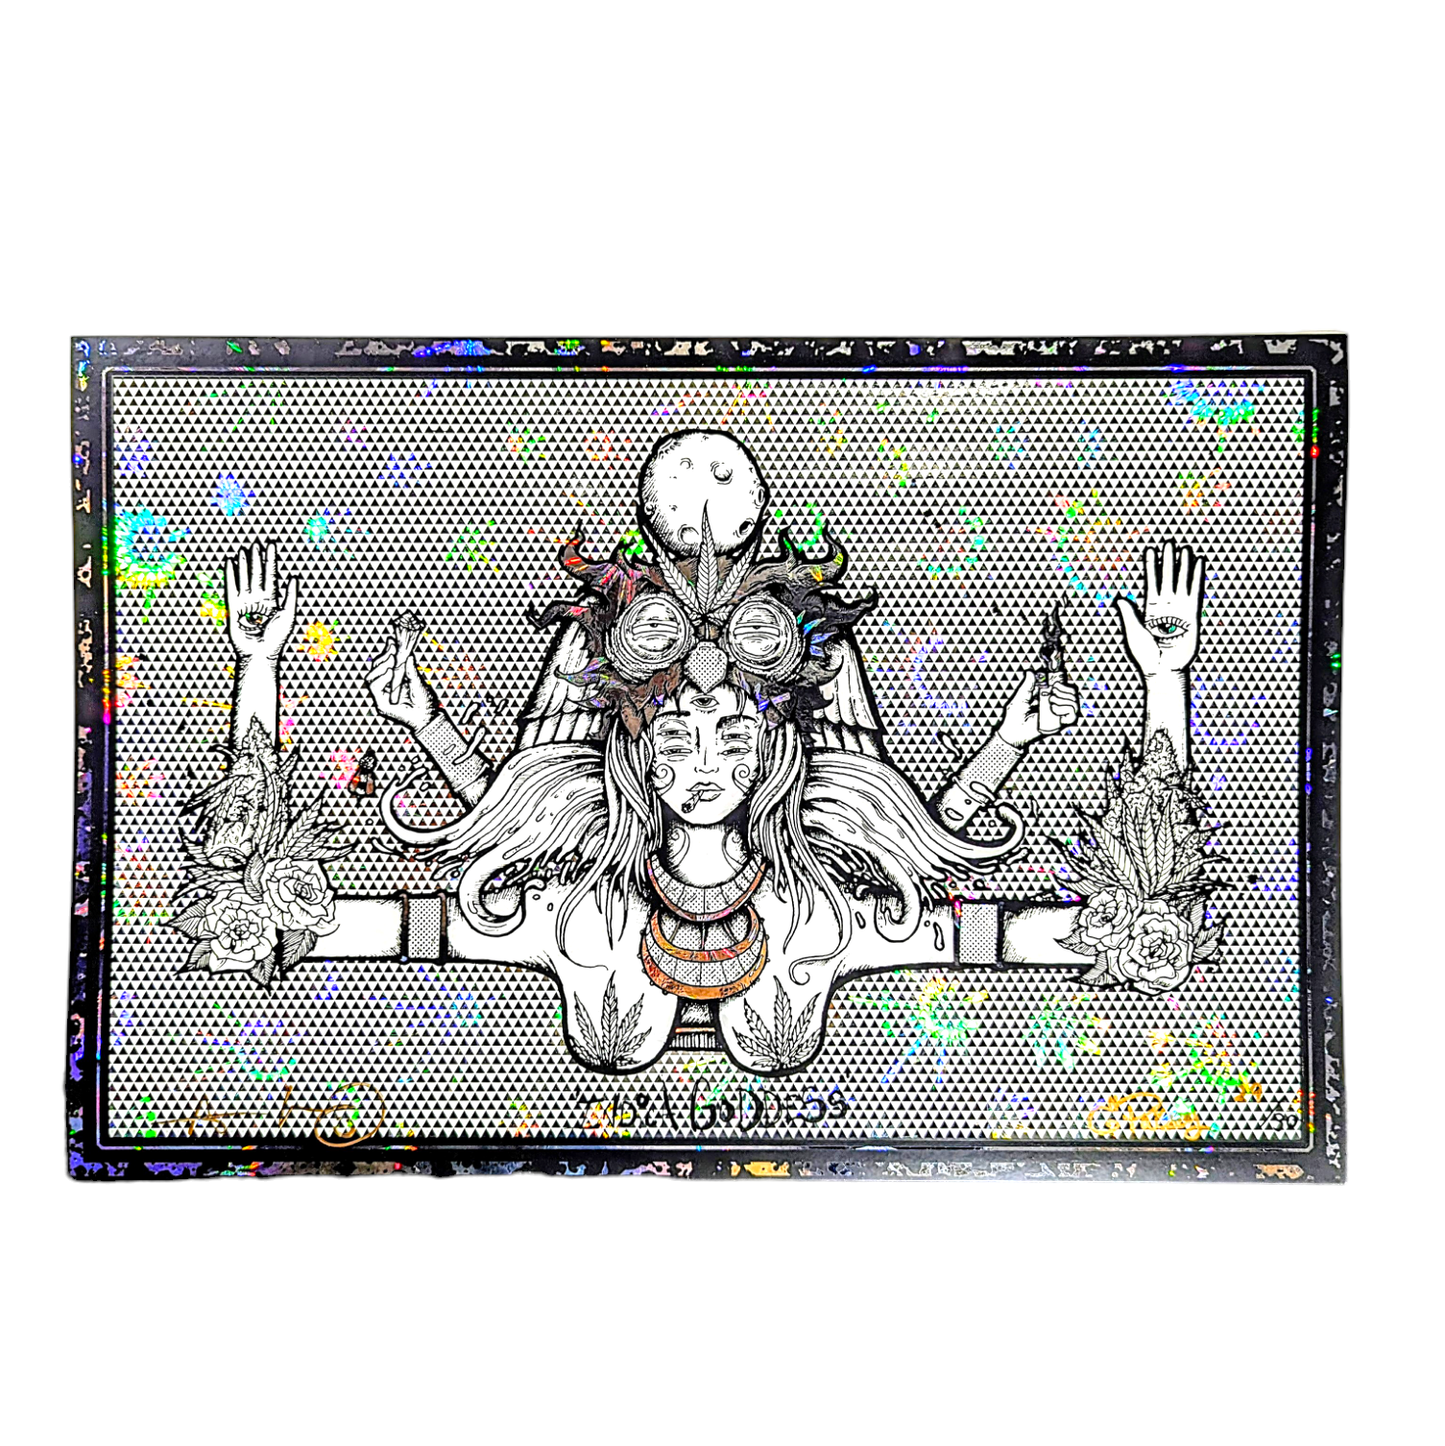 Aaron Brooks x Ellie Paisley Indica Goddess, 2024 3 Color Screen Print on Leaf Foil 12 x 18 in Edition of 30  Hand Signed + Numbered by the artists. Printed in Colorado by CIK STUDIOS.